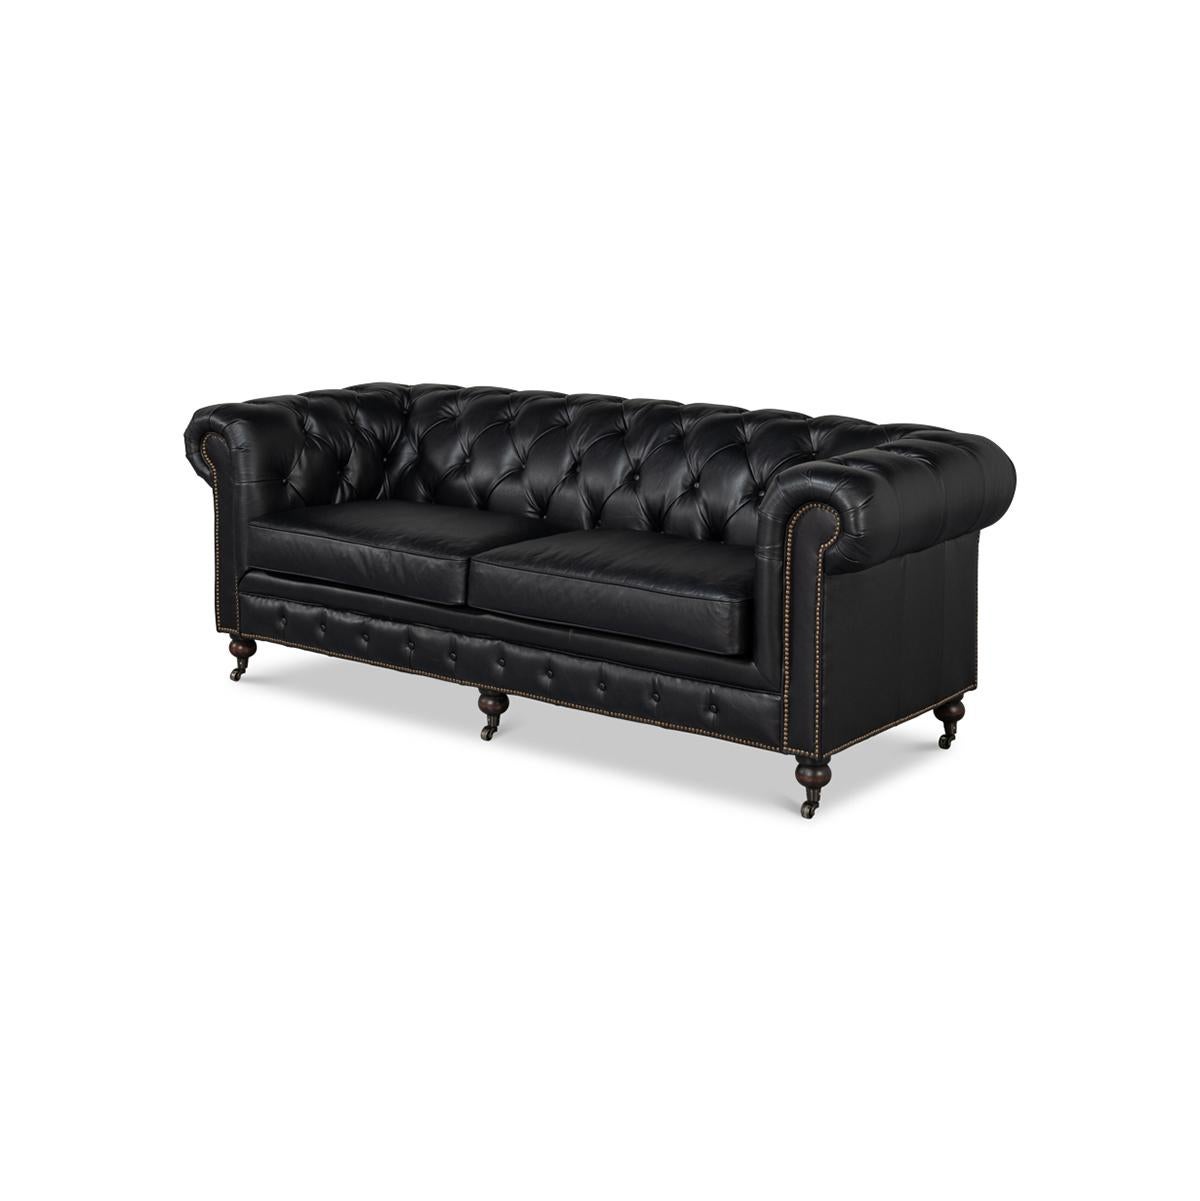 American Classical Black Chesterfield Sofa For Sale